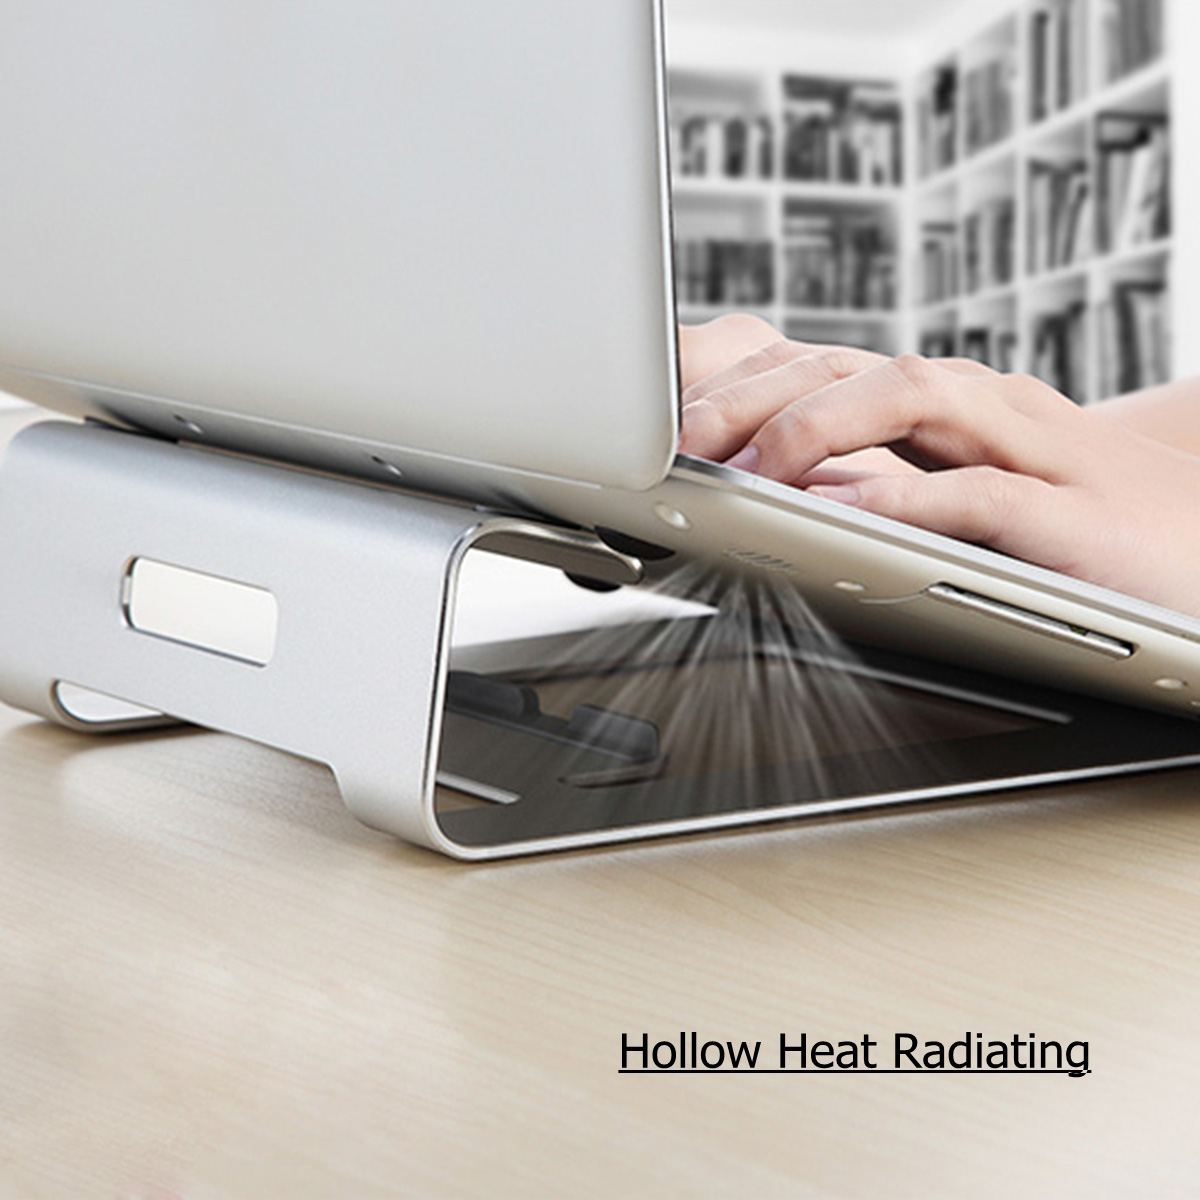 Universal Aluminum Alloy Heat Dissipation Laptop Stand Tablet Holder for Macbook iPad & iPhone 